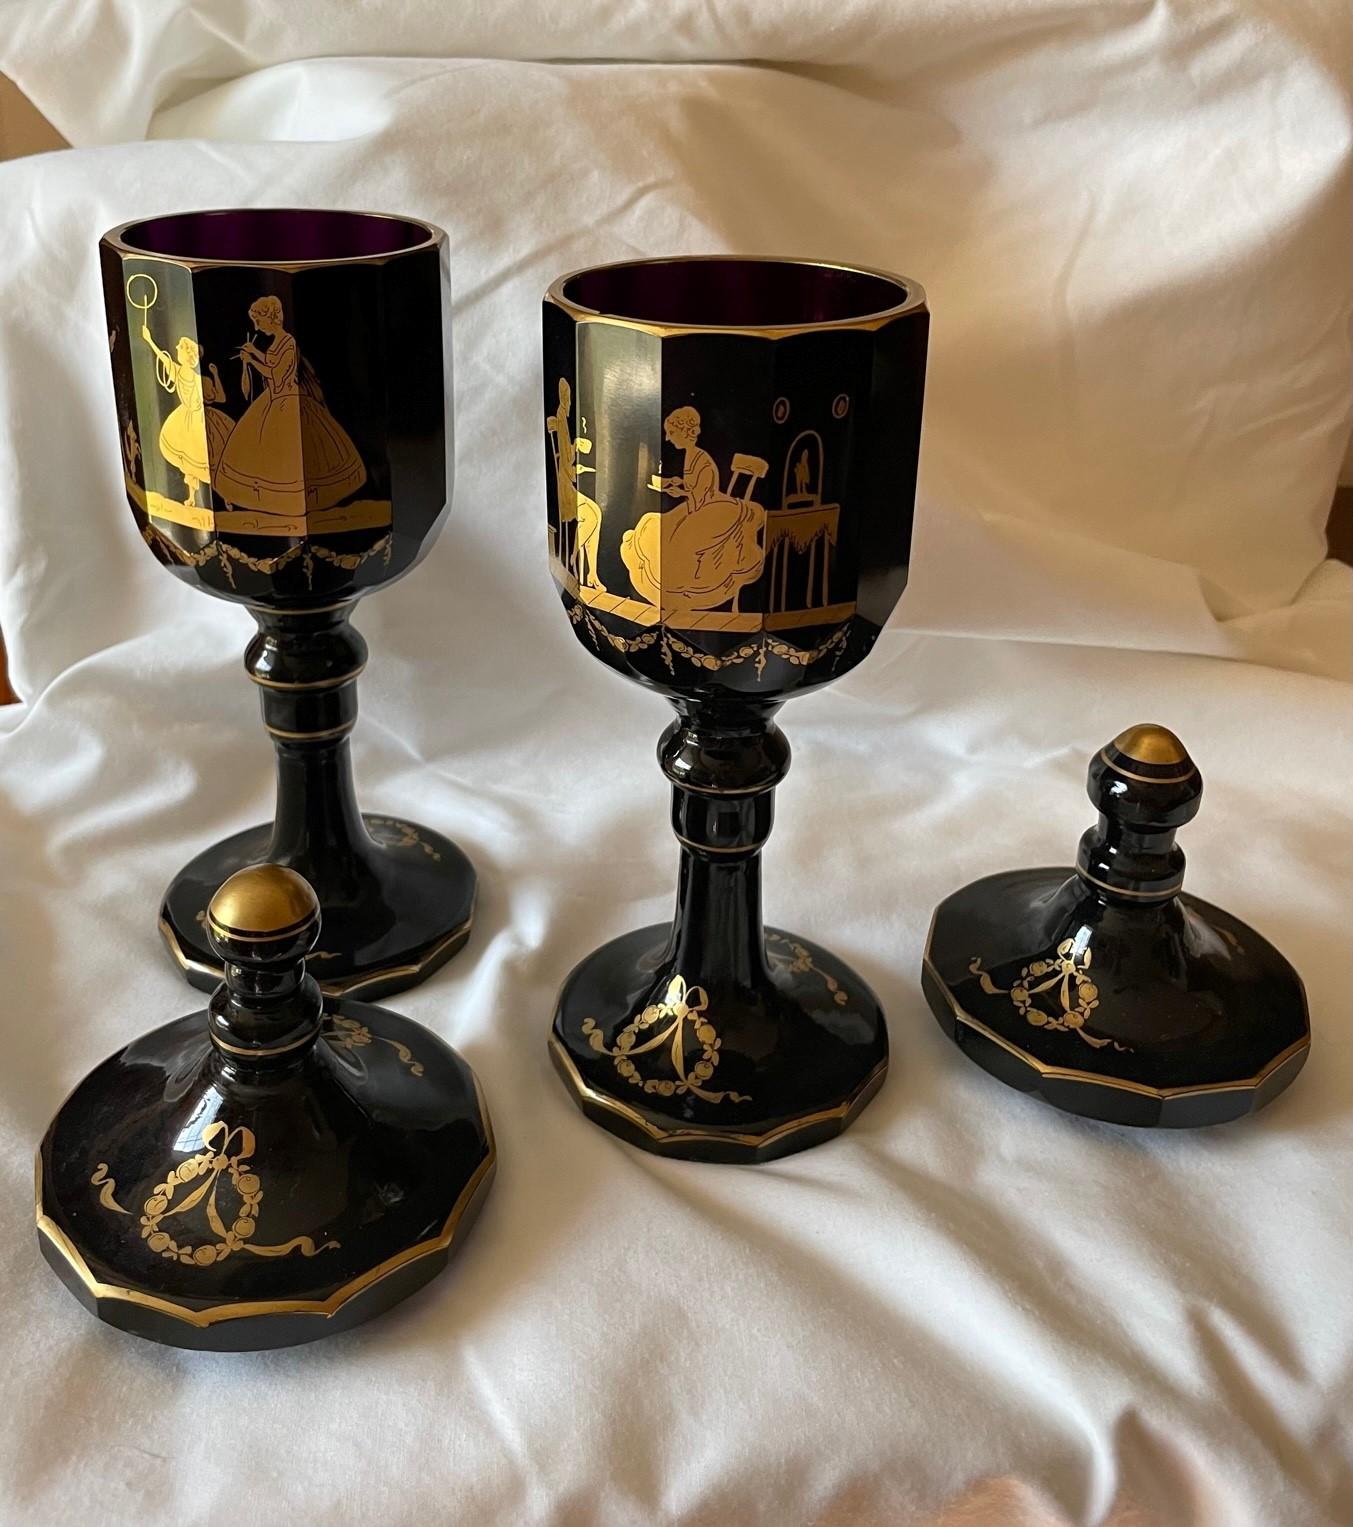 Antique Bohemian Moser large pair of Lidded Amethyst crystal Goblets 19th century

Outstanding pair of heavy Moser rich dark amethyst crystal goblets with lids. Artfully hand gilded scenes embellish the beautiful shape of the goblets. The dark